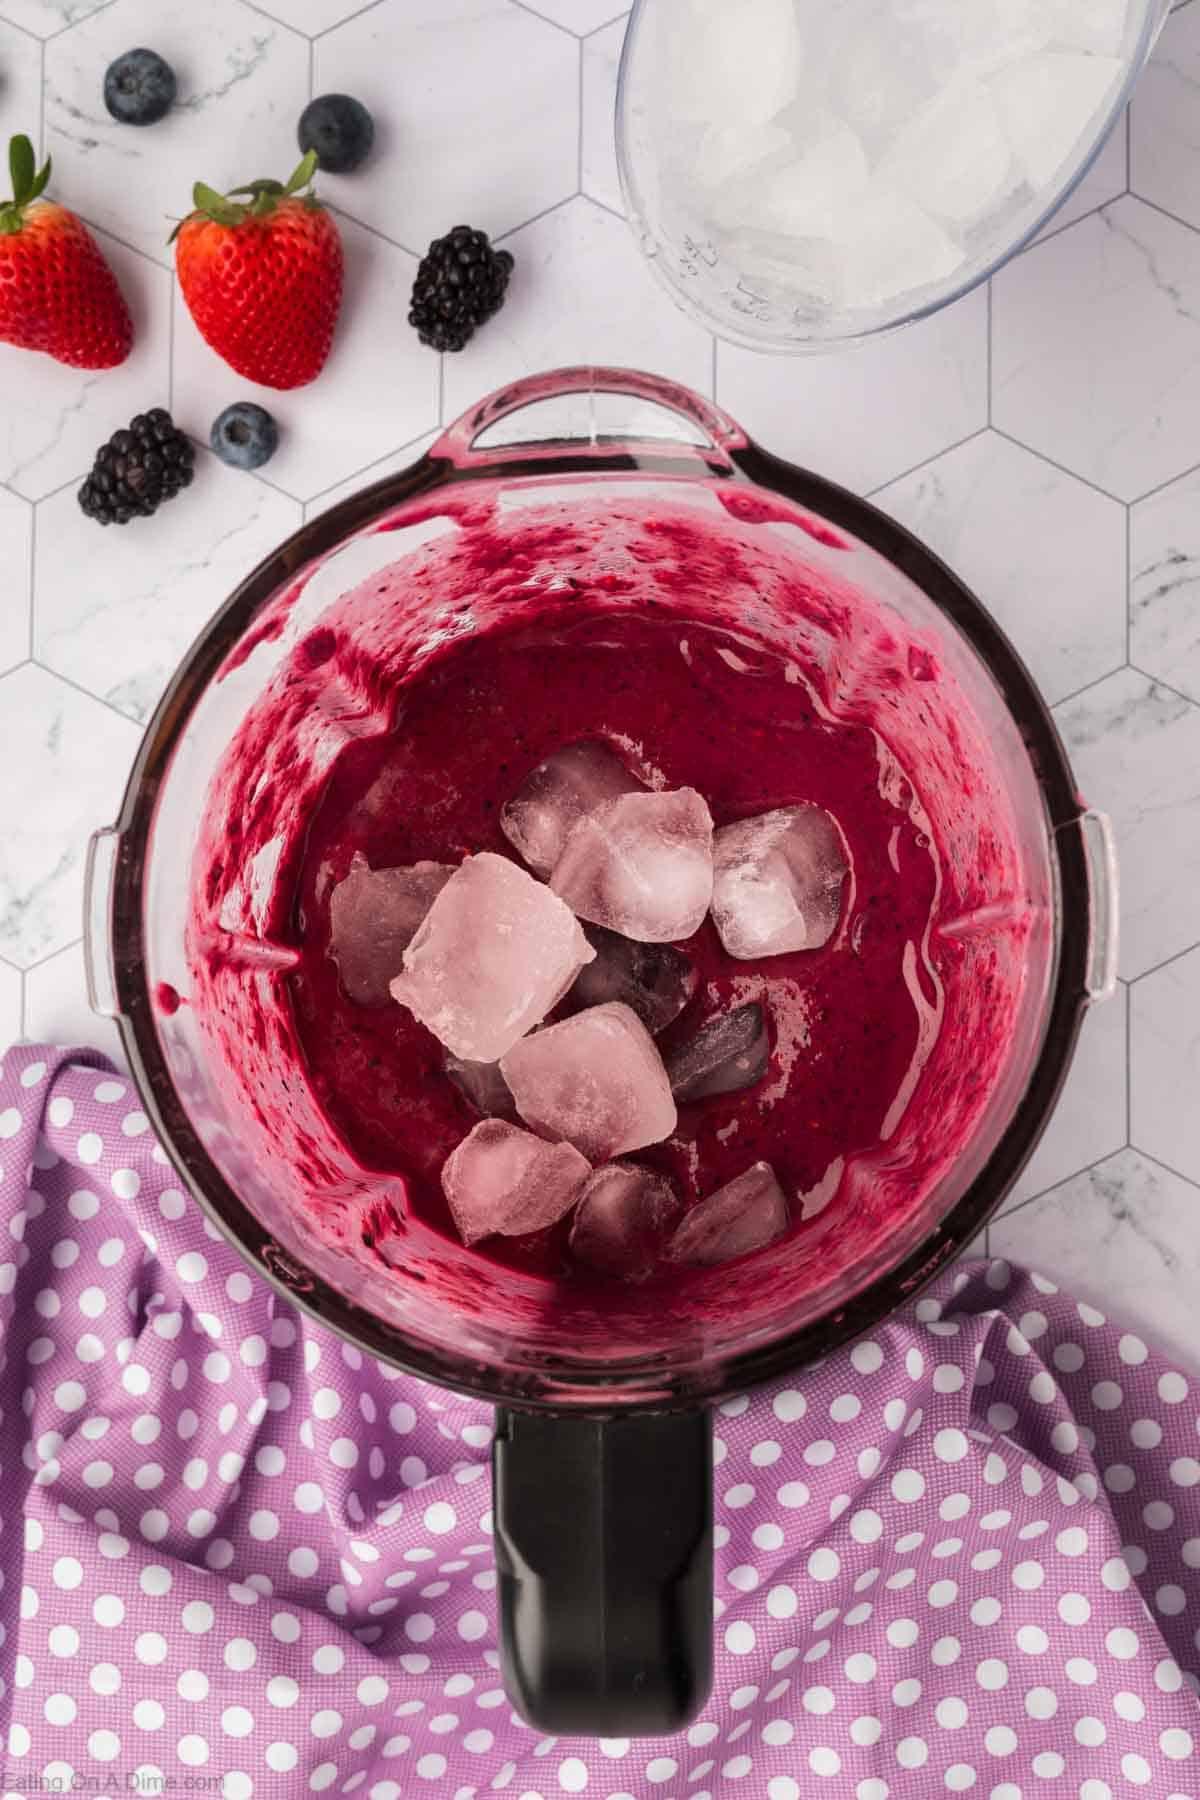 Blended mixed berries topped with ice in a blender